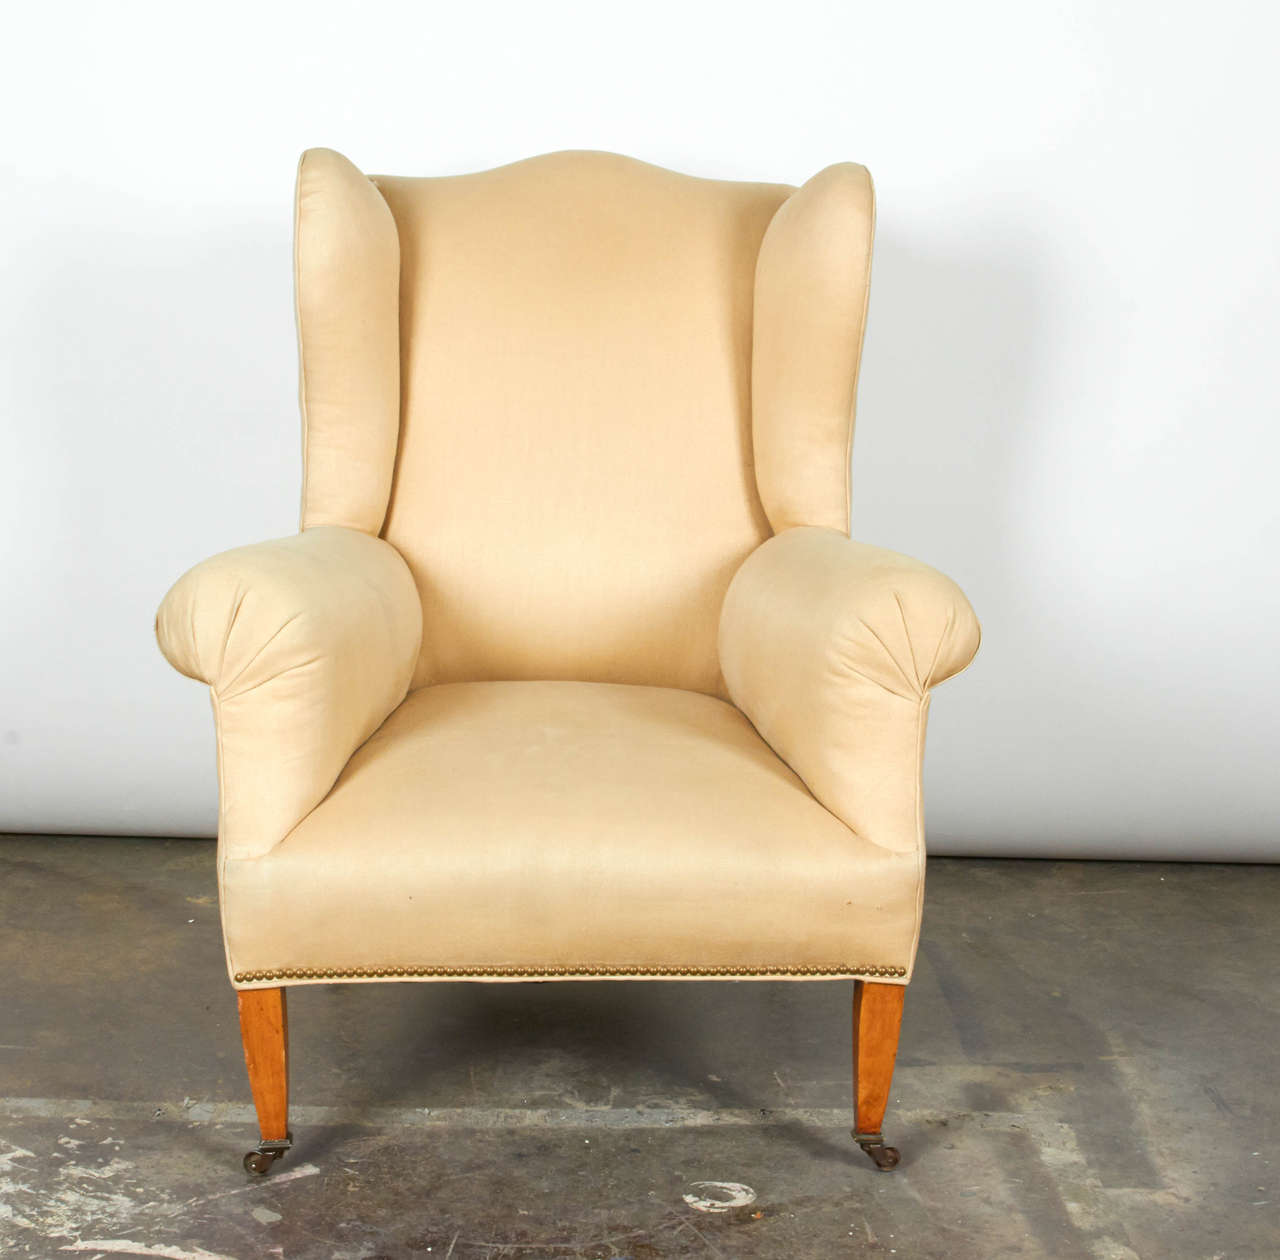 20th century Hepplewhite style wing chair with tapered legs on brass casters.

*Not available for sale or to ship in the state of California.